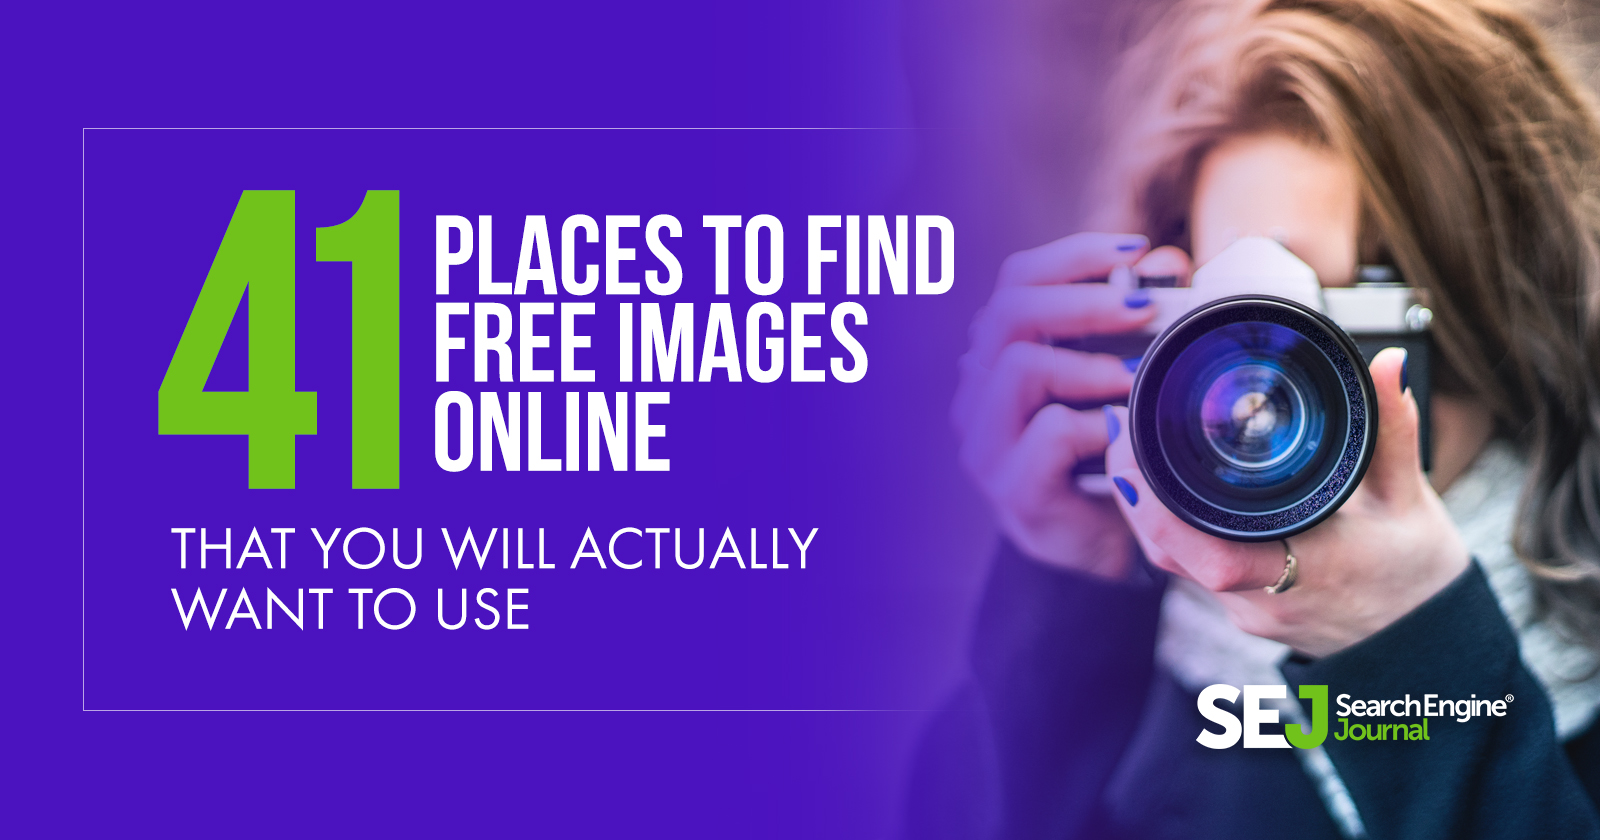 41 Places to Find Free Images Online